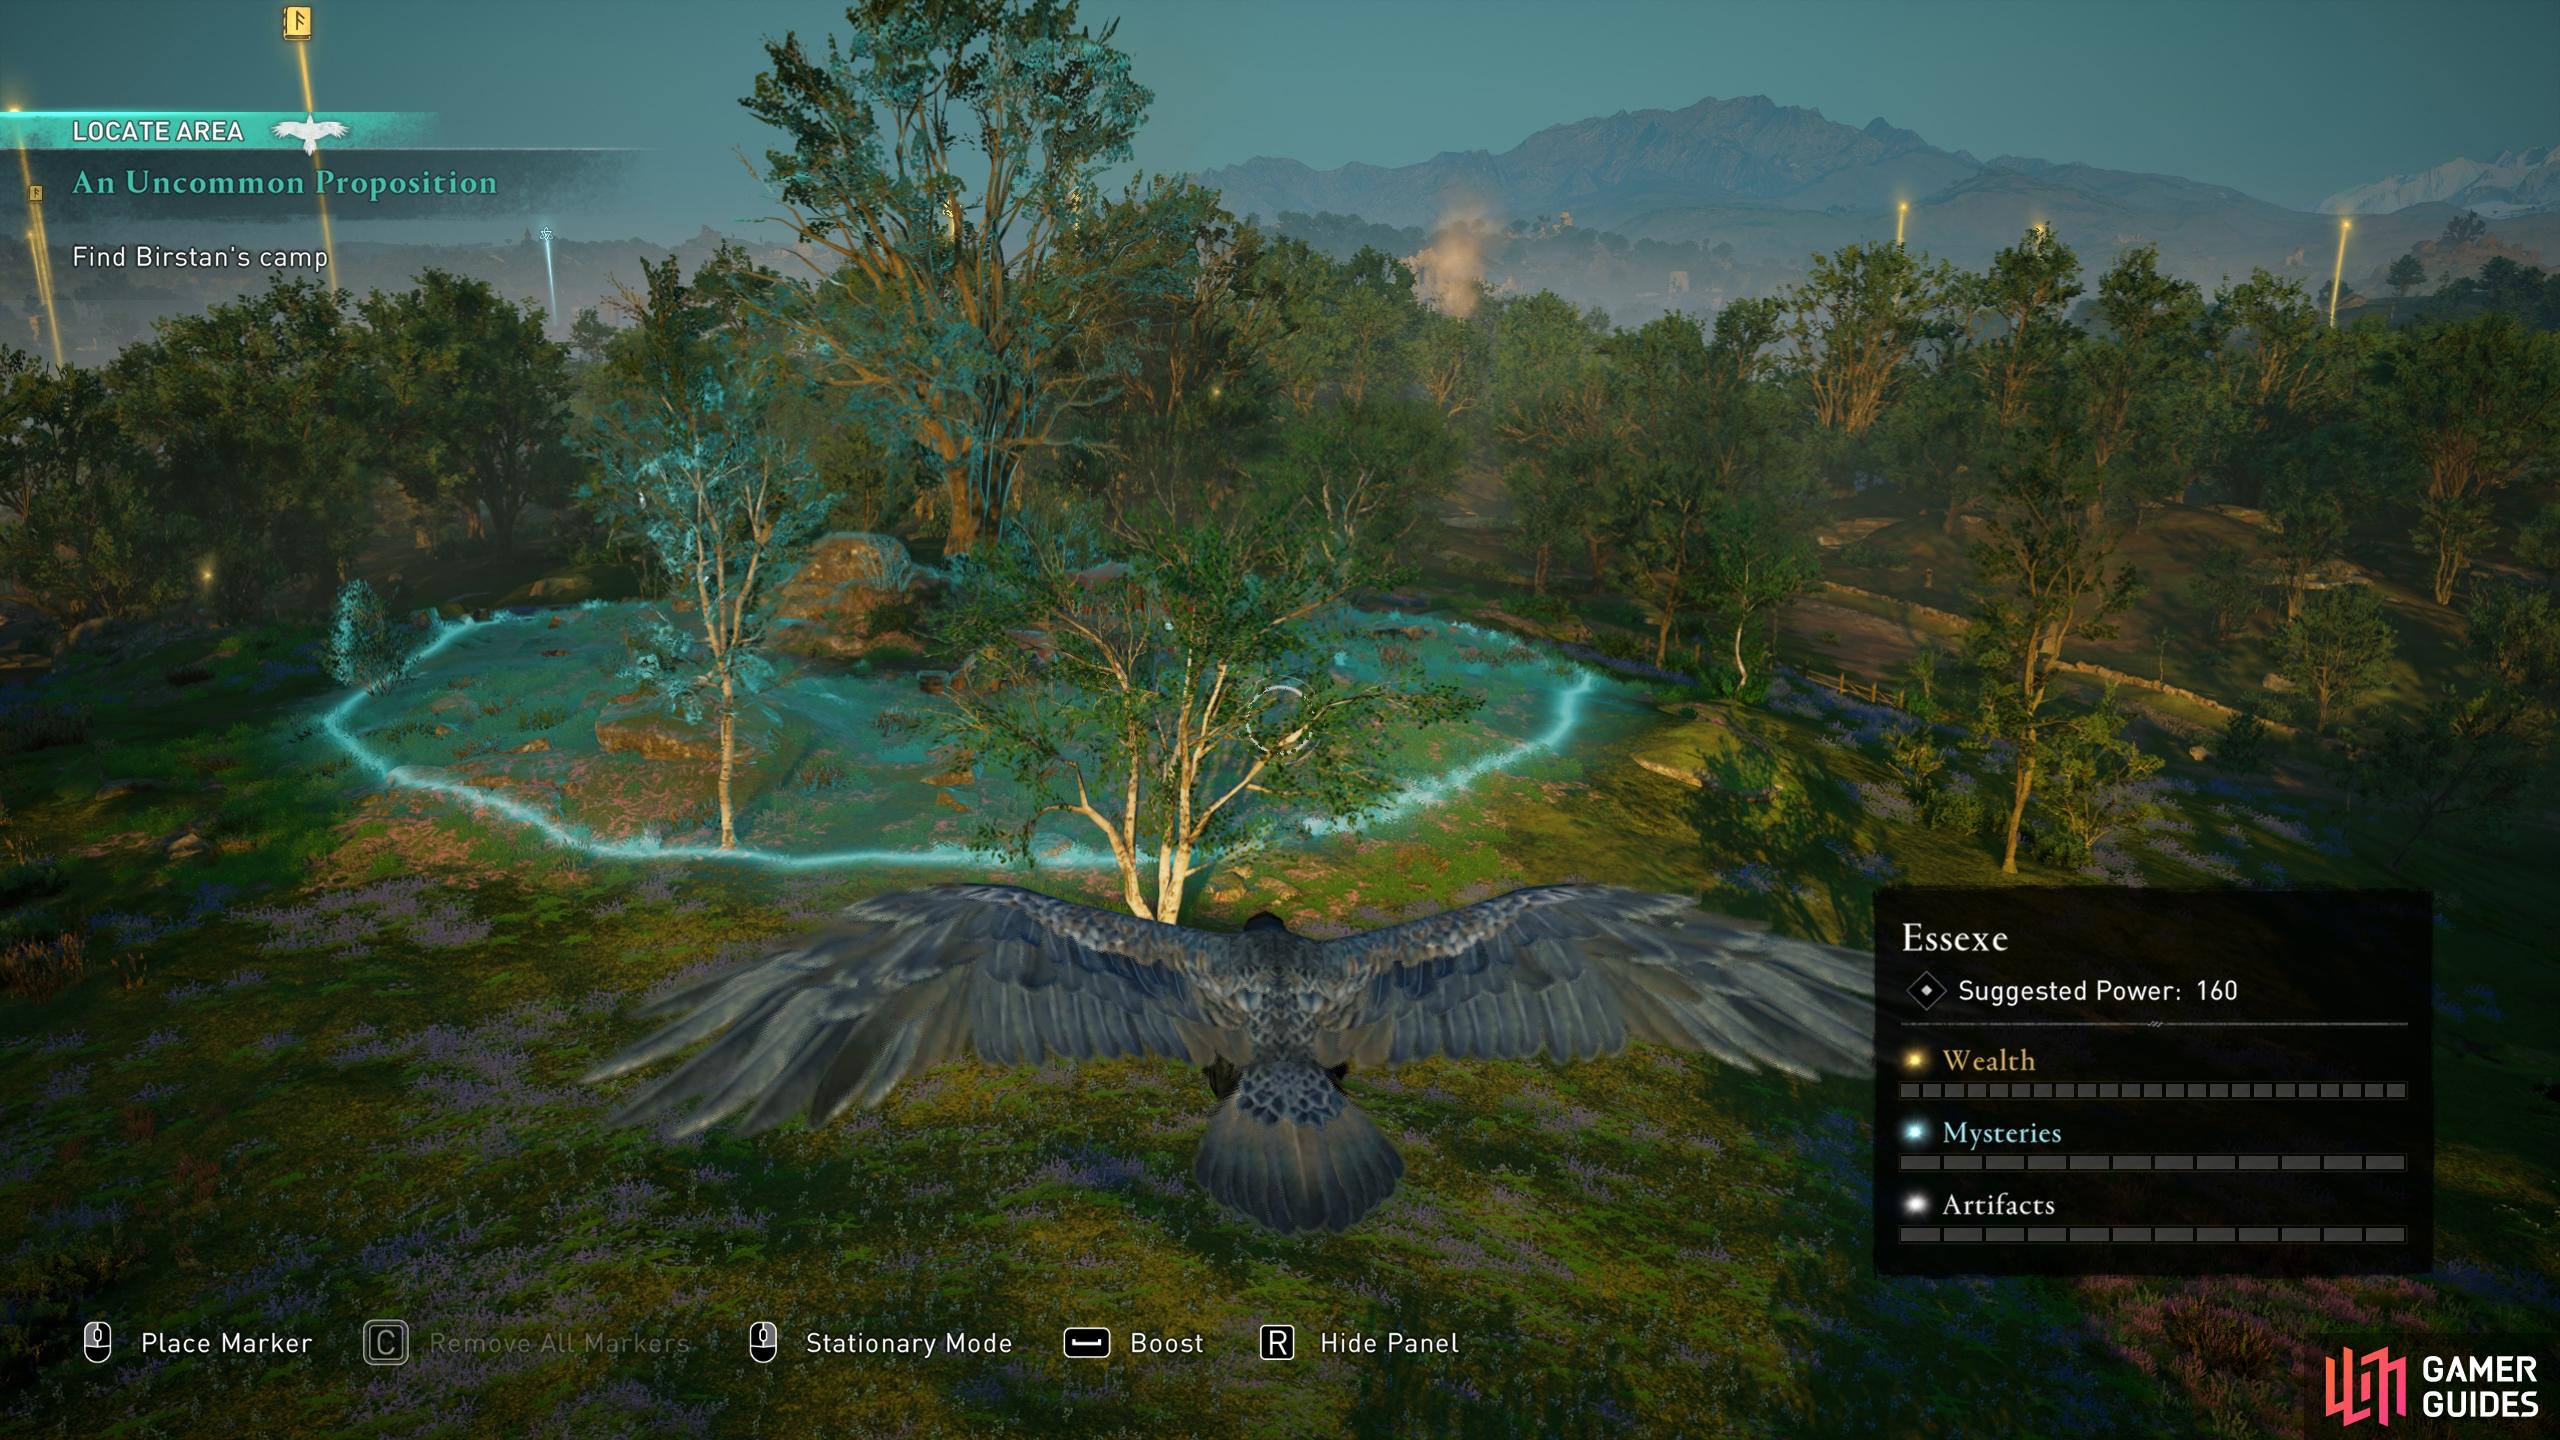 Use your raven to scout the camp and its surroundings.